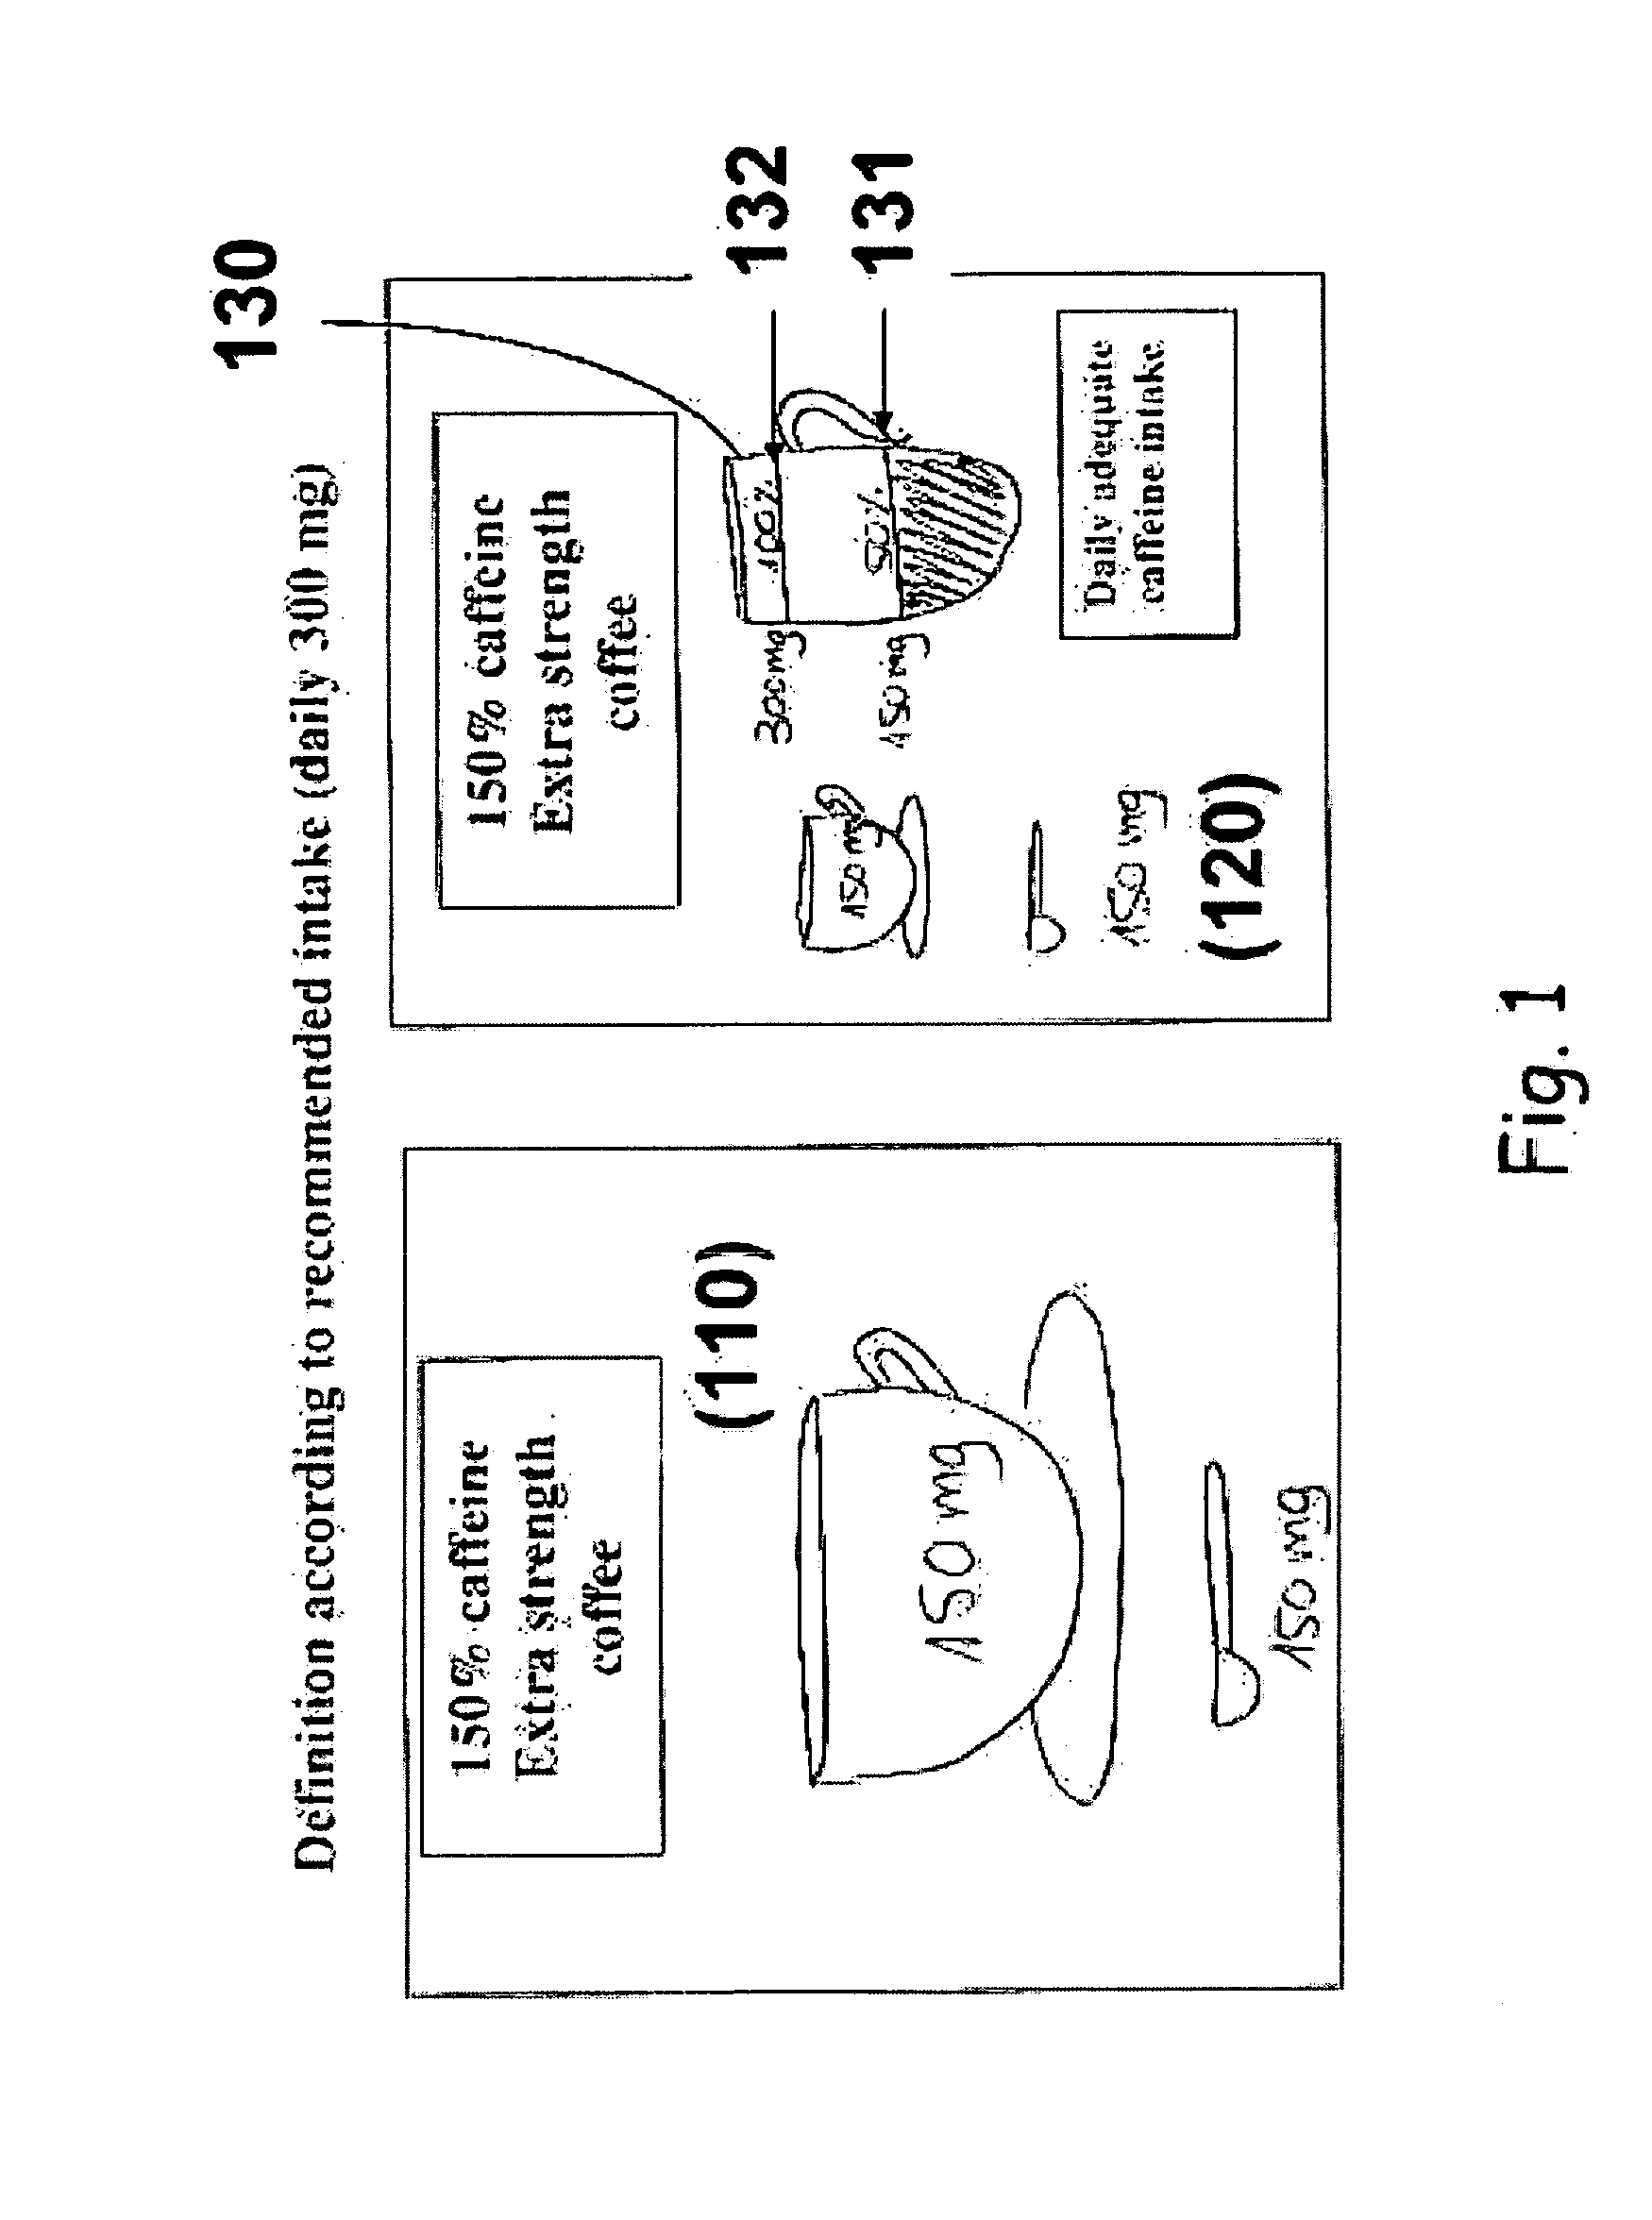 System and method for control of caffeine preparation and use